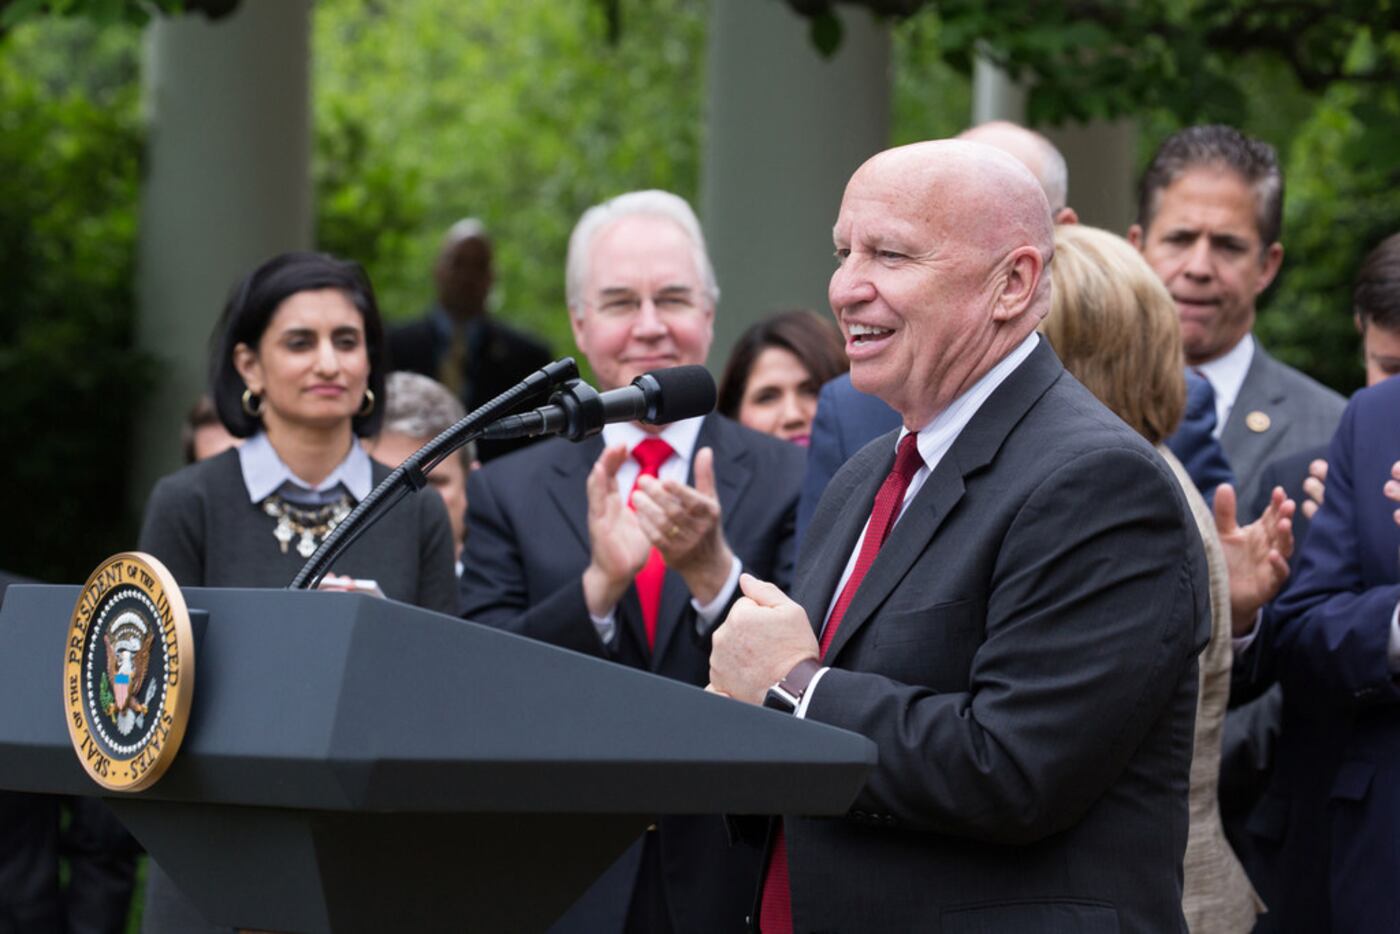 Rep. Kevin Brady, R-The Woodlands, said Democrats are "weaponizing the tax code" by seeking...